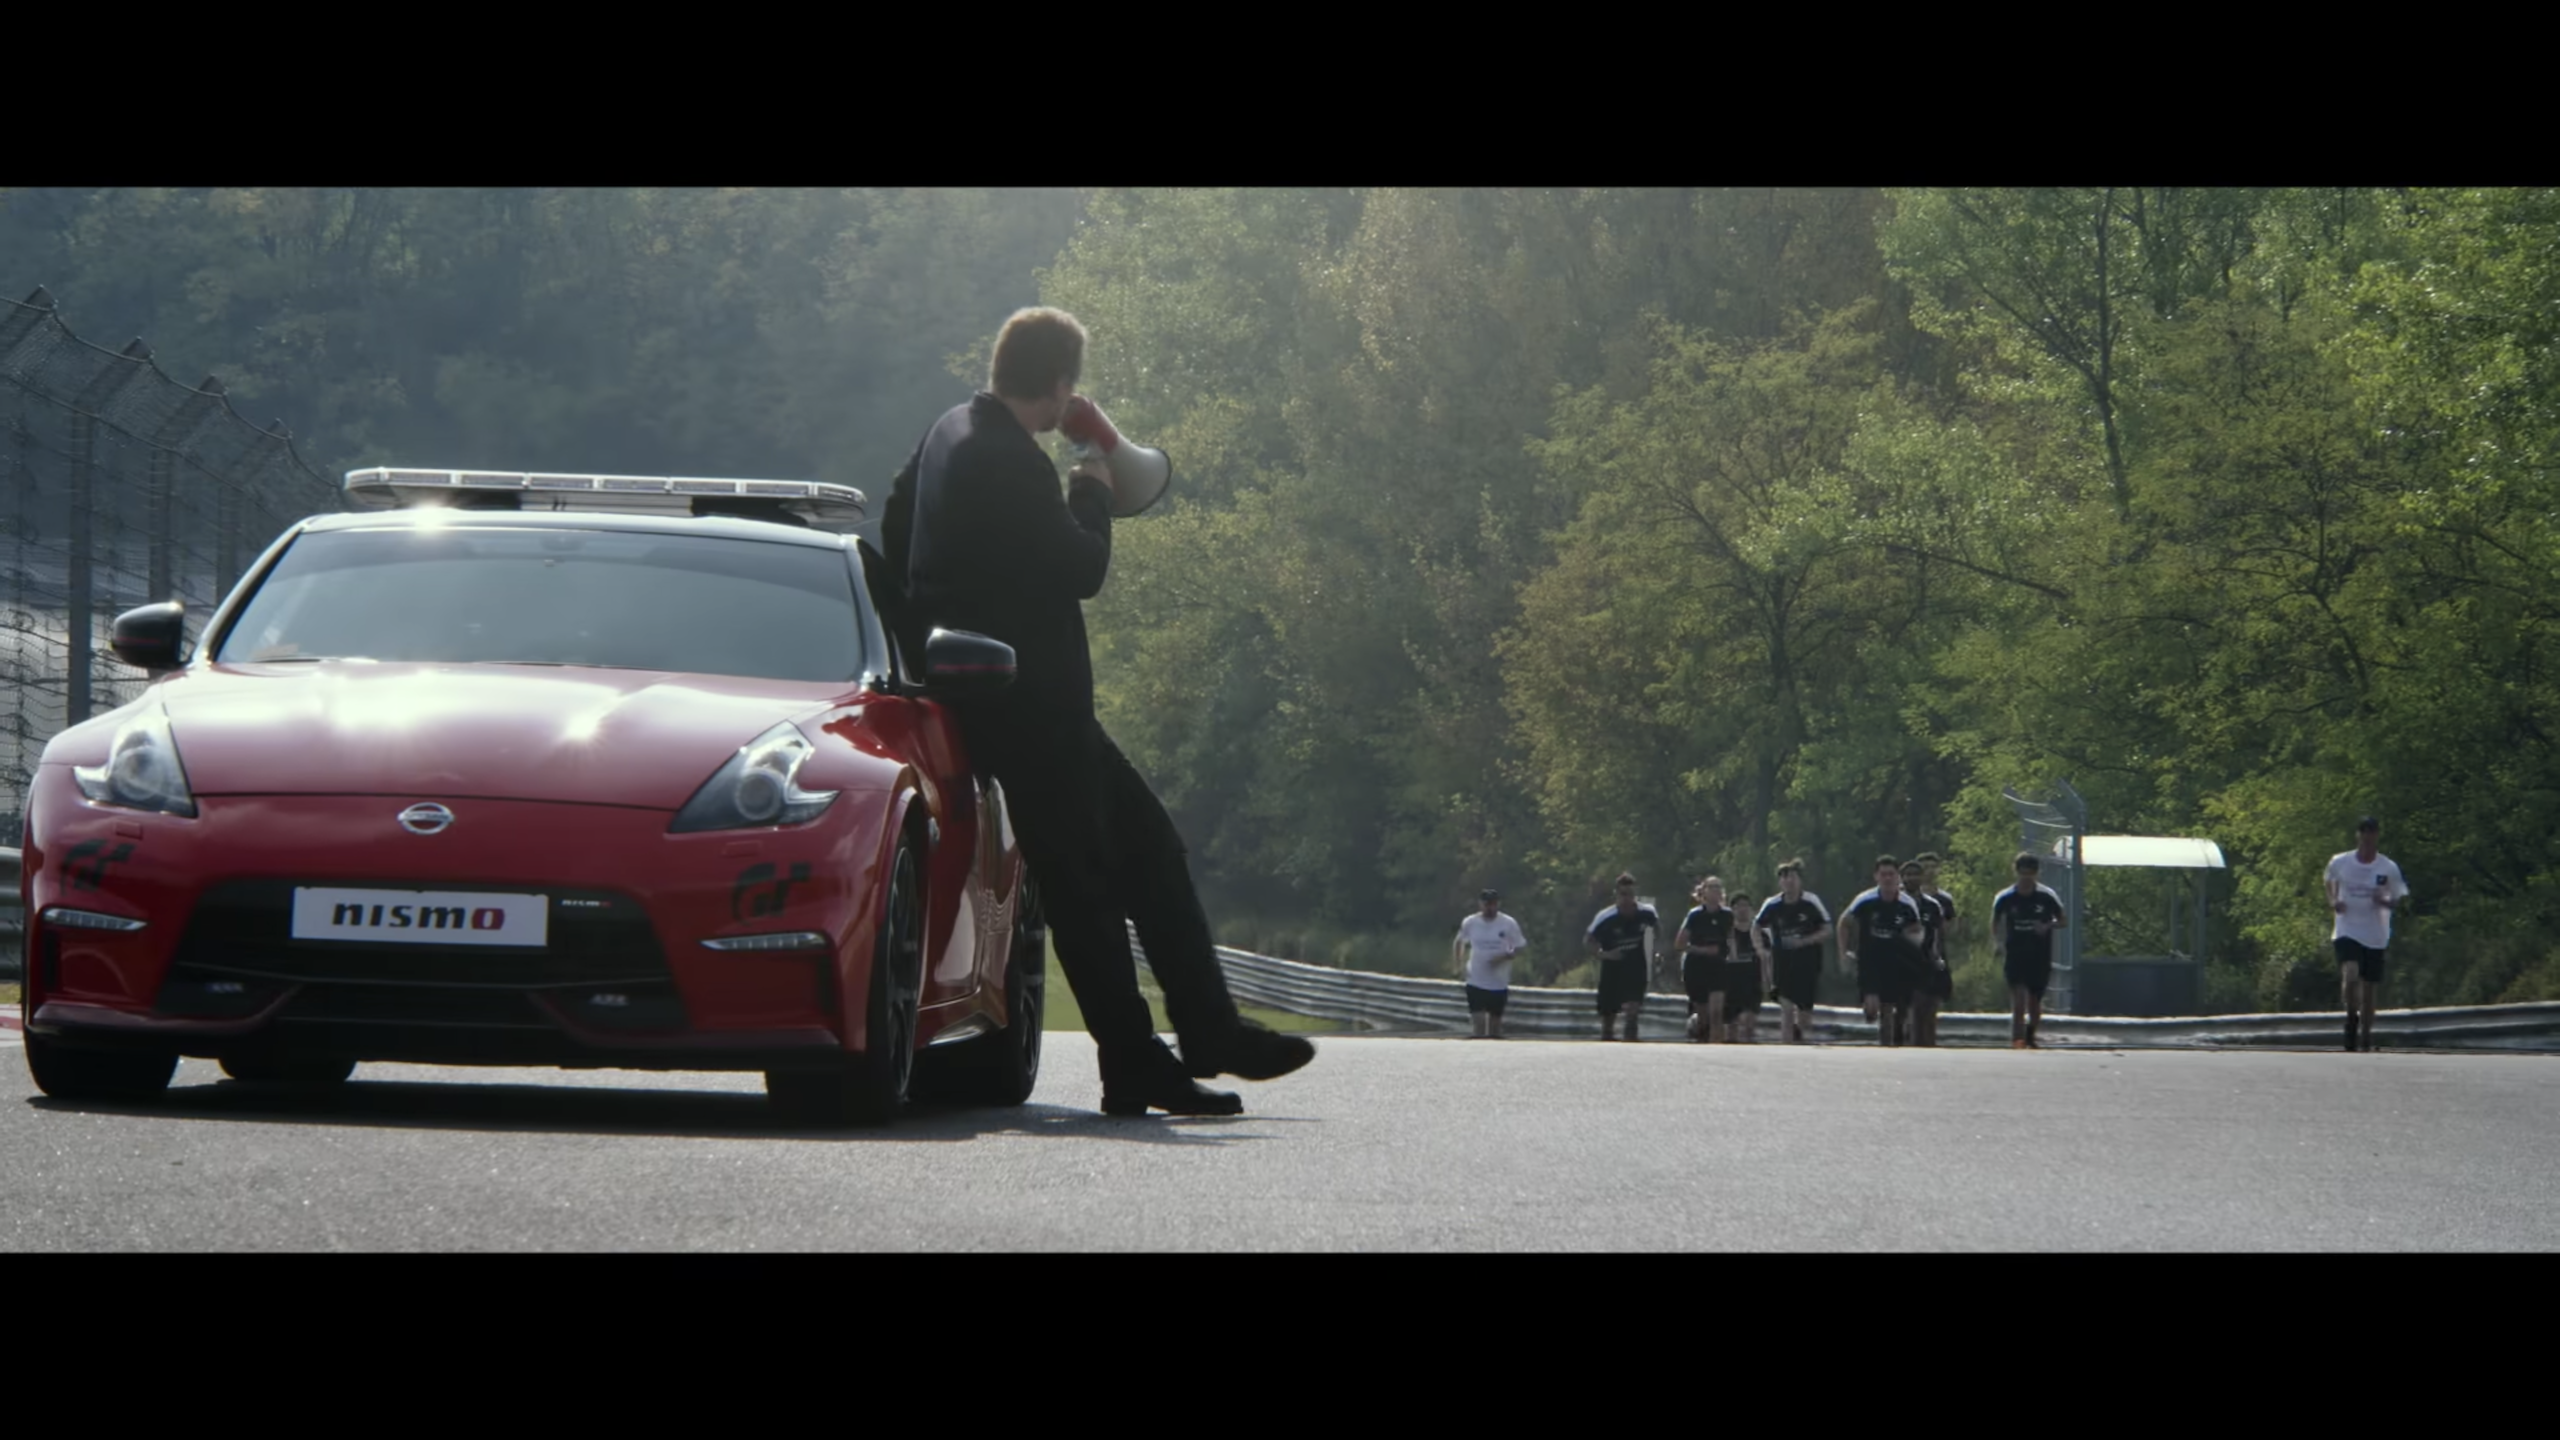 First Gran Turismo movie trailer spotlights the 'gamer to racer